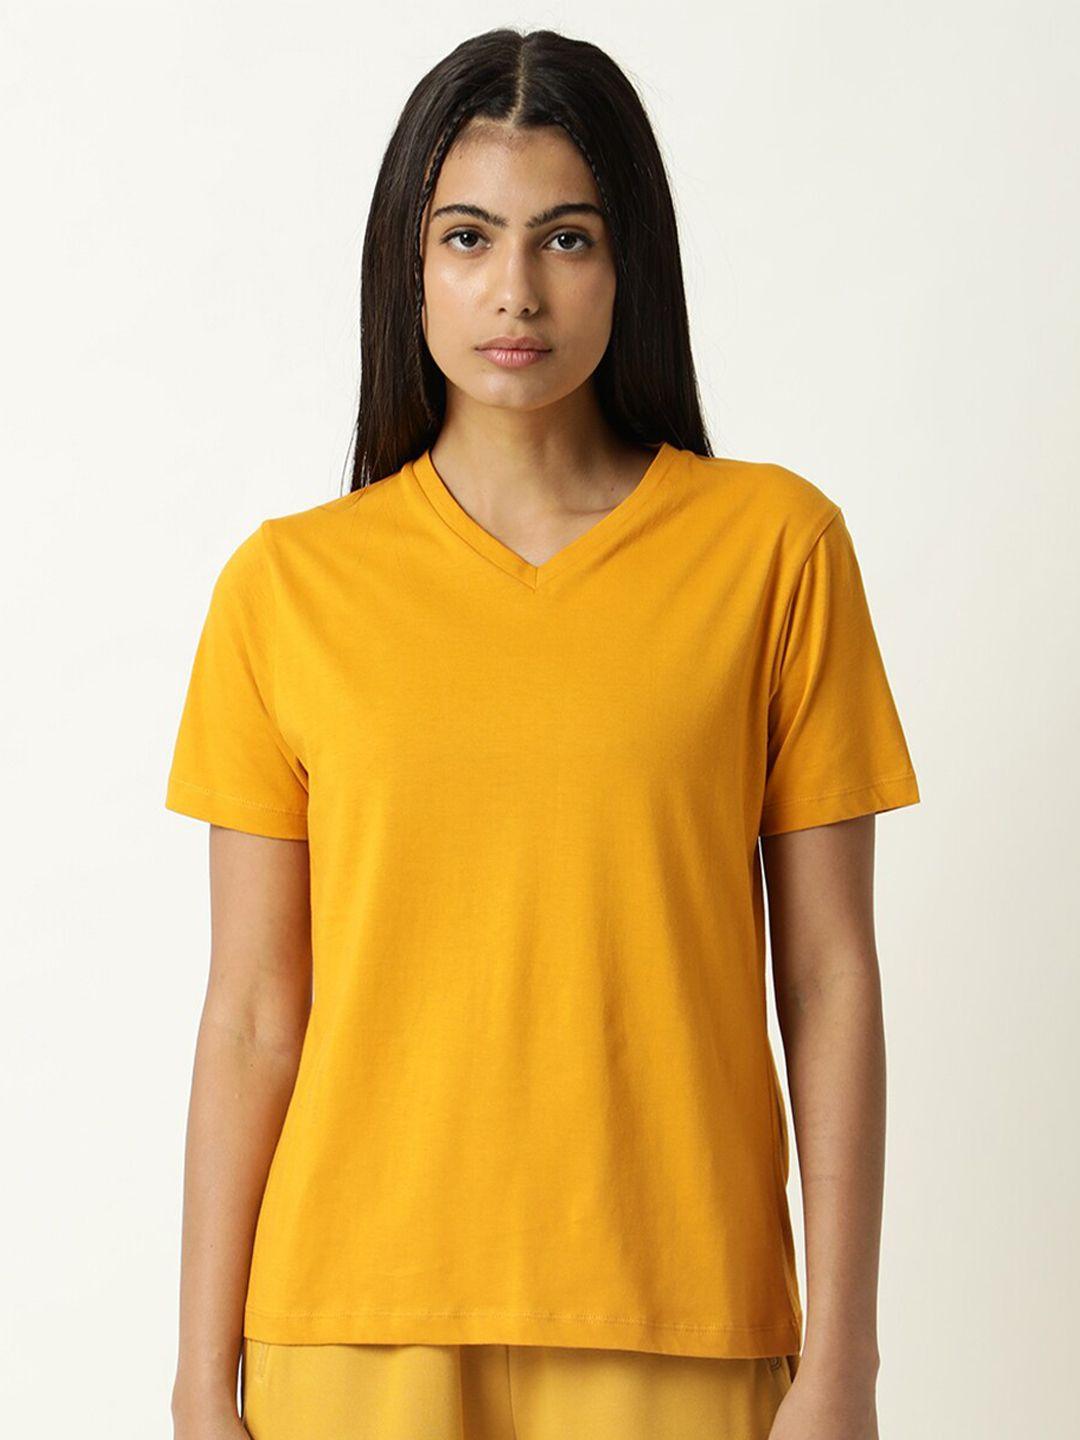 articale women mustard yellow solid v-neck slim fit cotton t-shirt